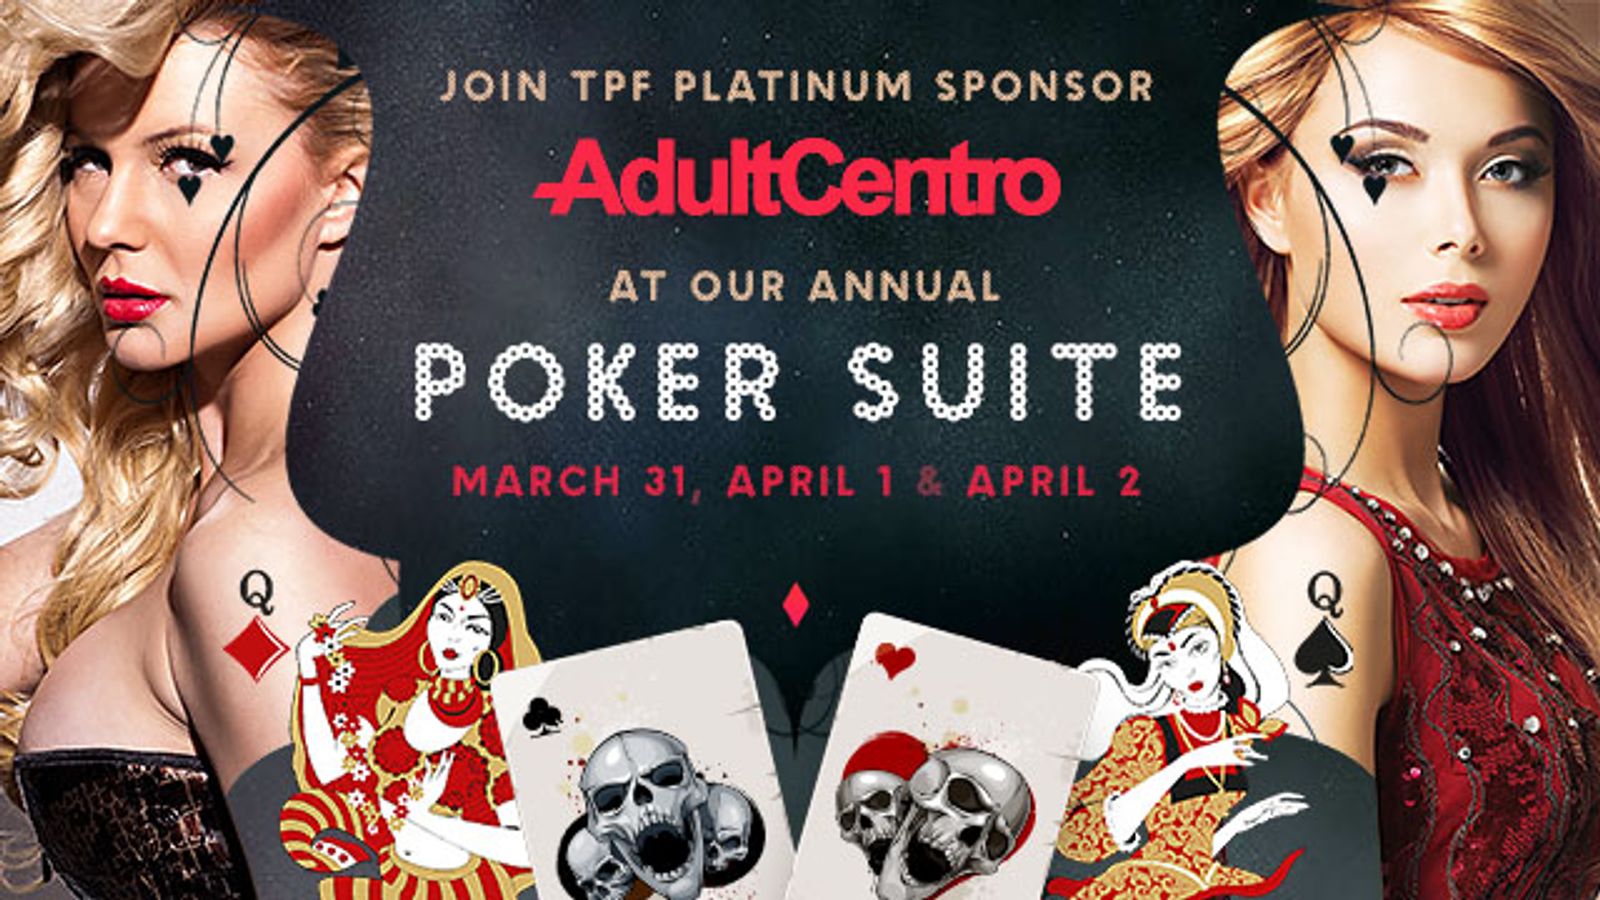 AdultCentro Signs On To Sponsor The Phoenix Forum, Late Night Poker Suite